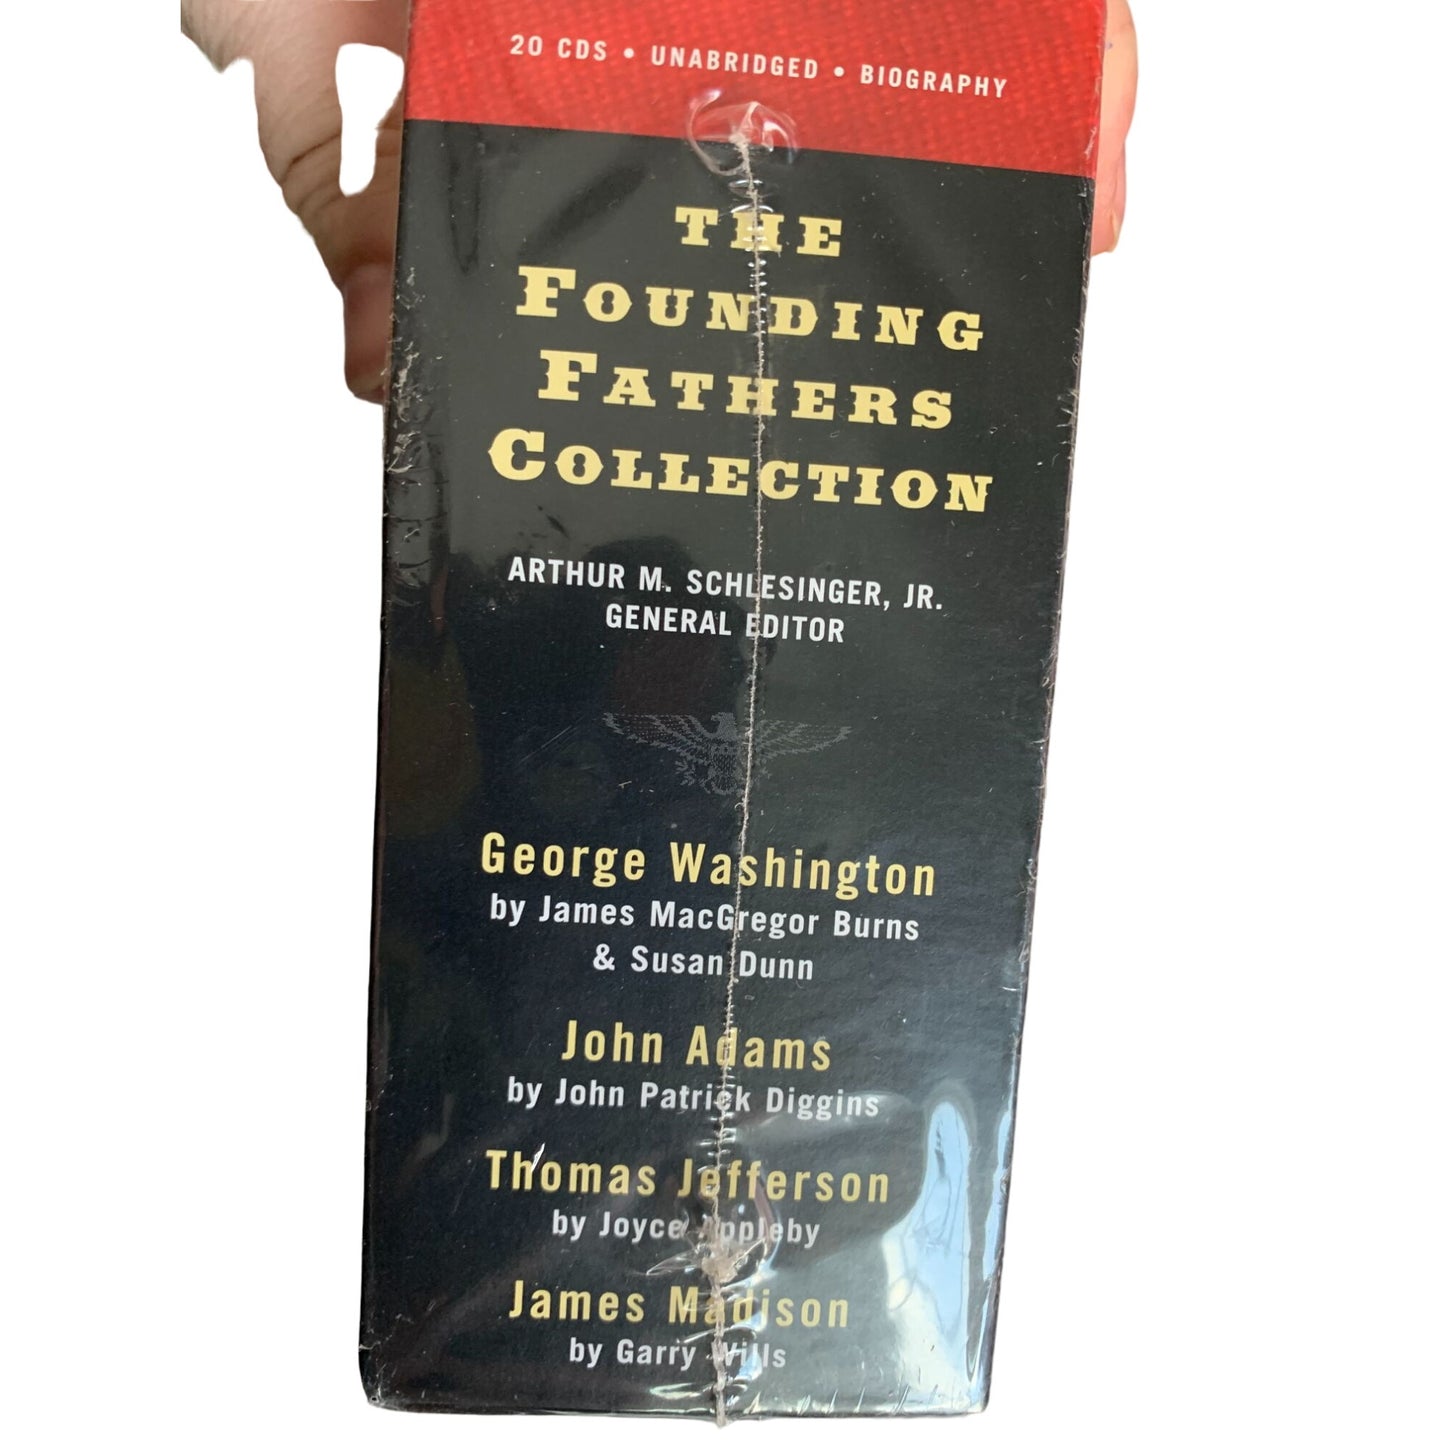 The Founding Fathers Collection- The First Four U.S. Presidents New with Tags